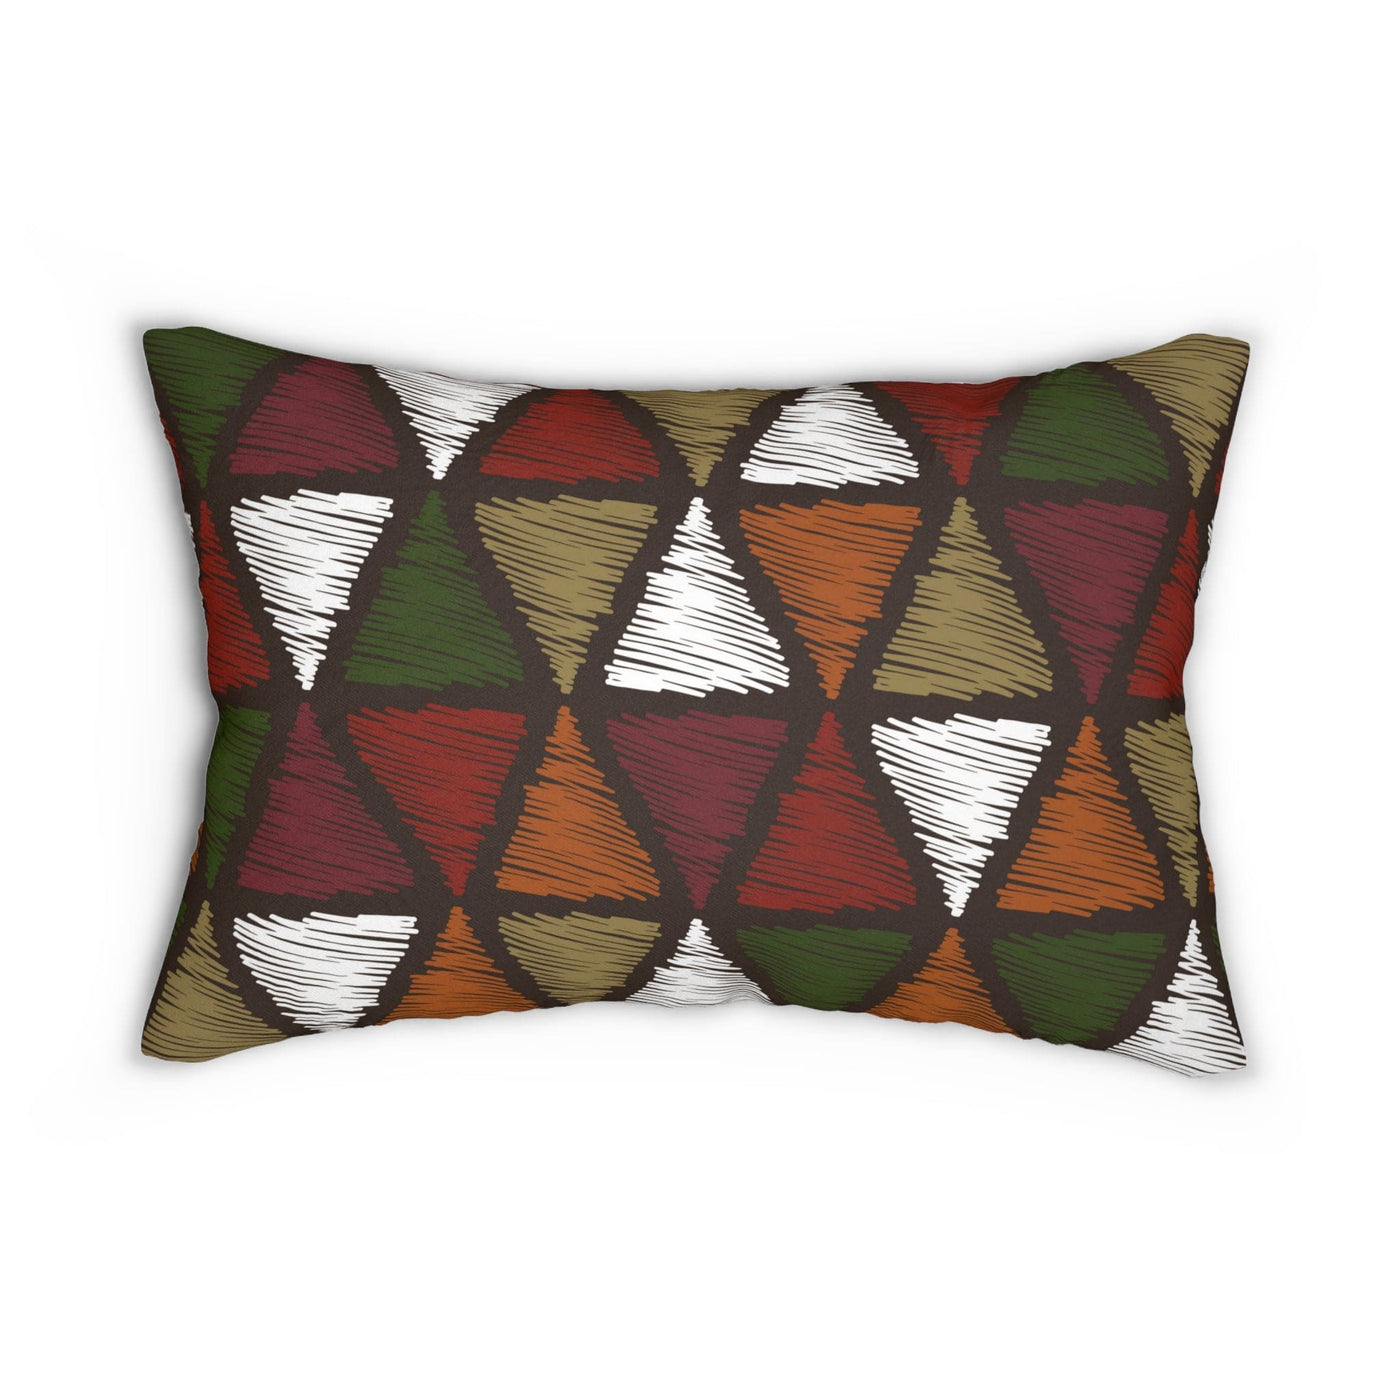 Decorative Lumbar Throw Pillow - Forest Green And White Tribal Quilting Fabric